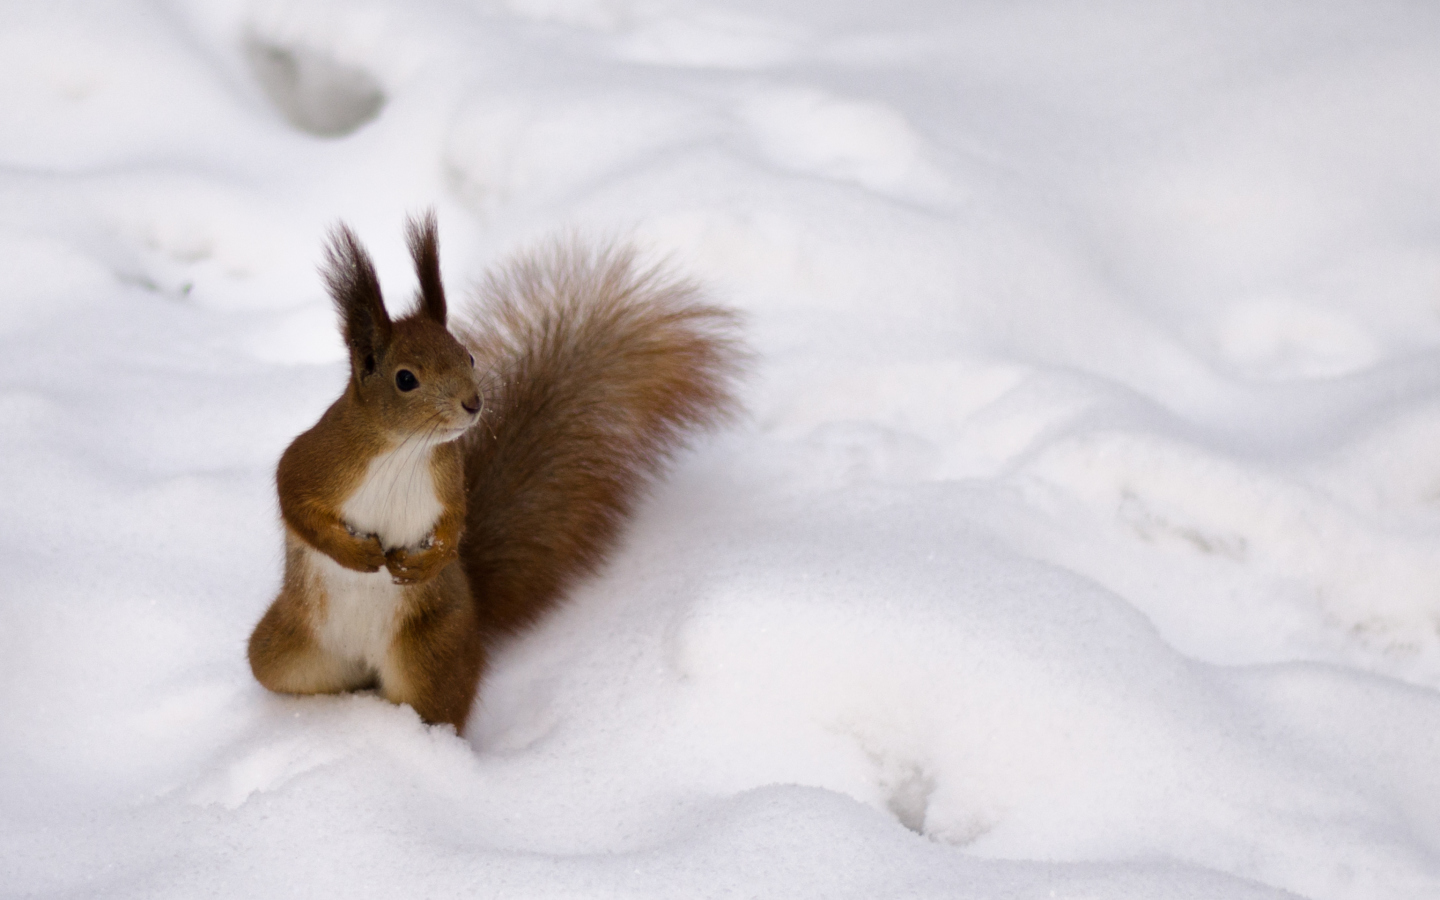 Funny Squirrel On Snow wallpaper 1440x900